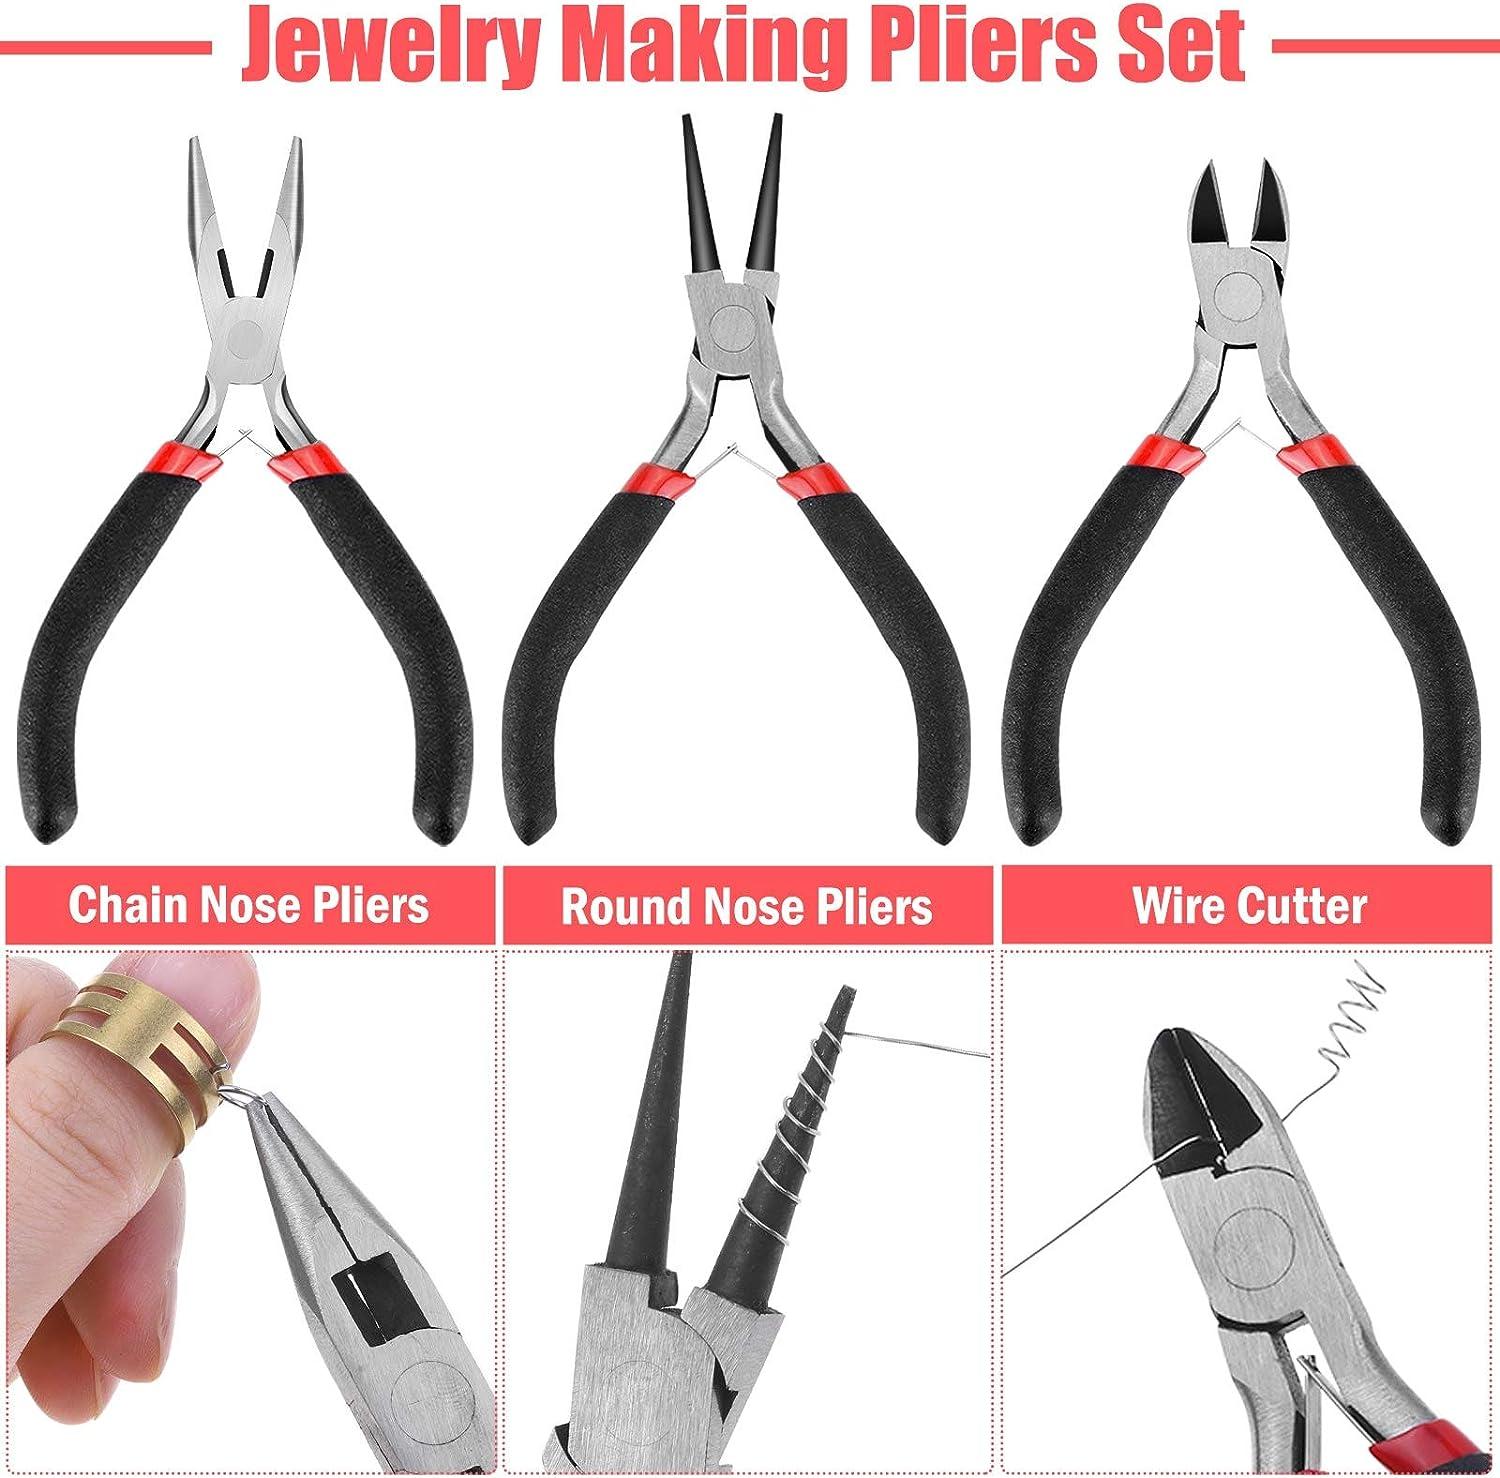 Thrilez Jewelry Wire Wrapping Jewelry Making Supplies Kit with Craft Ring Wire  Jewelry Tools Jewelry Pliers and Jewelry Findings for Jewelry Repair Wire  Wrapping and Beading